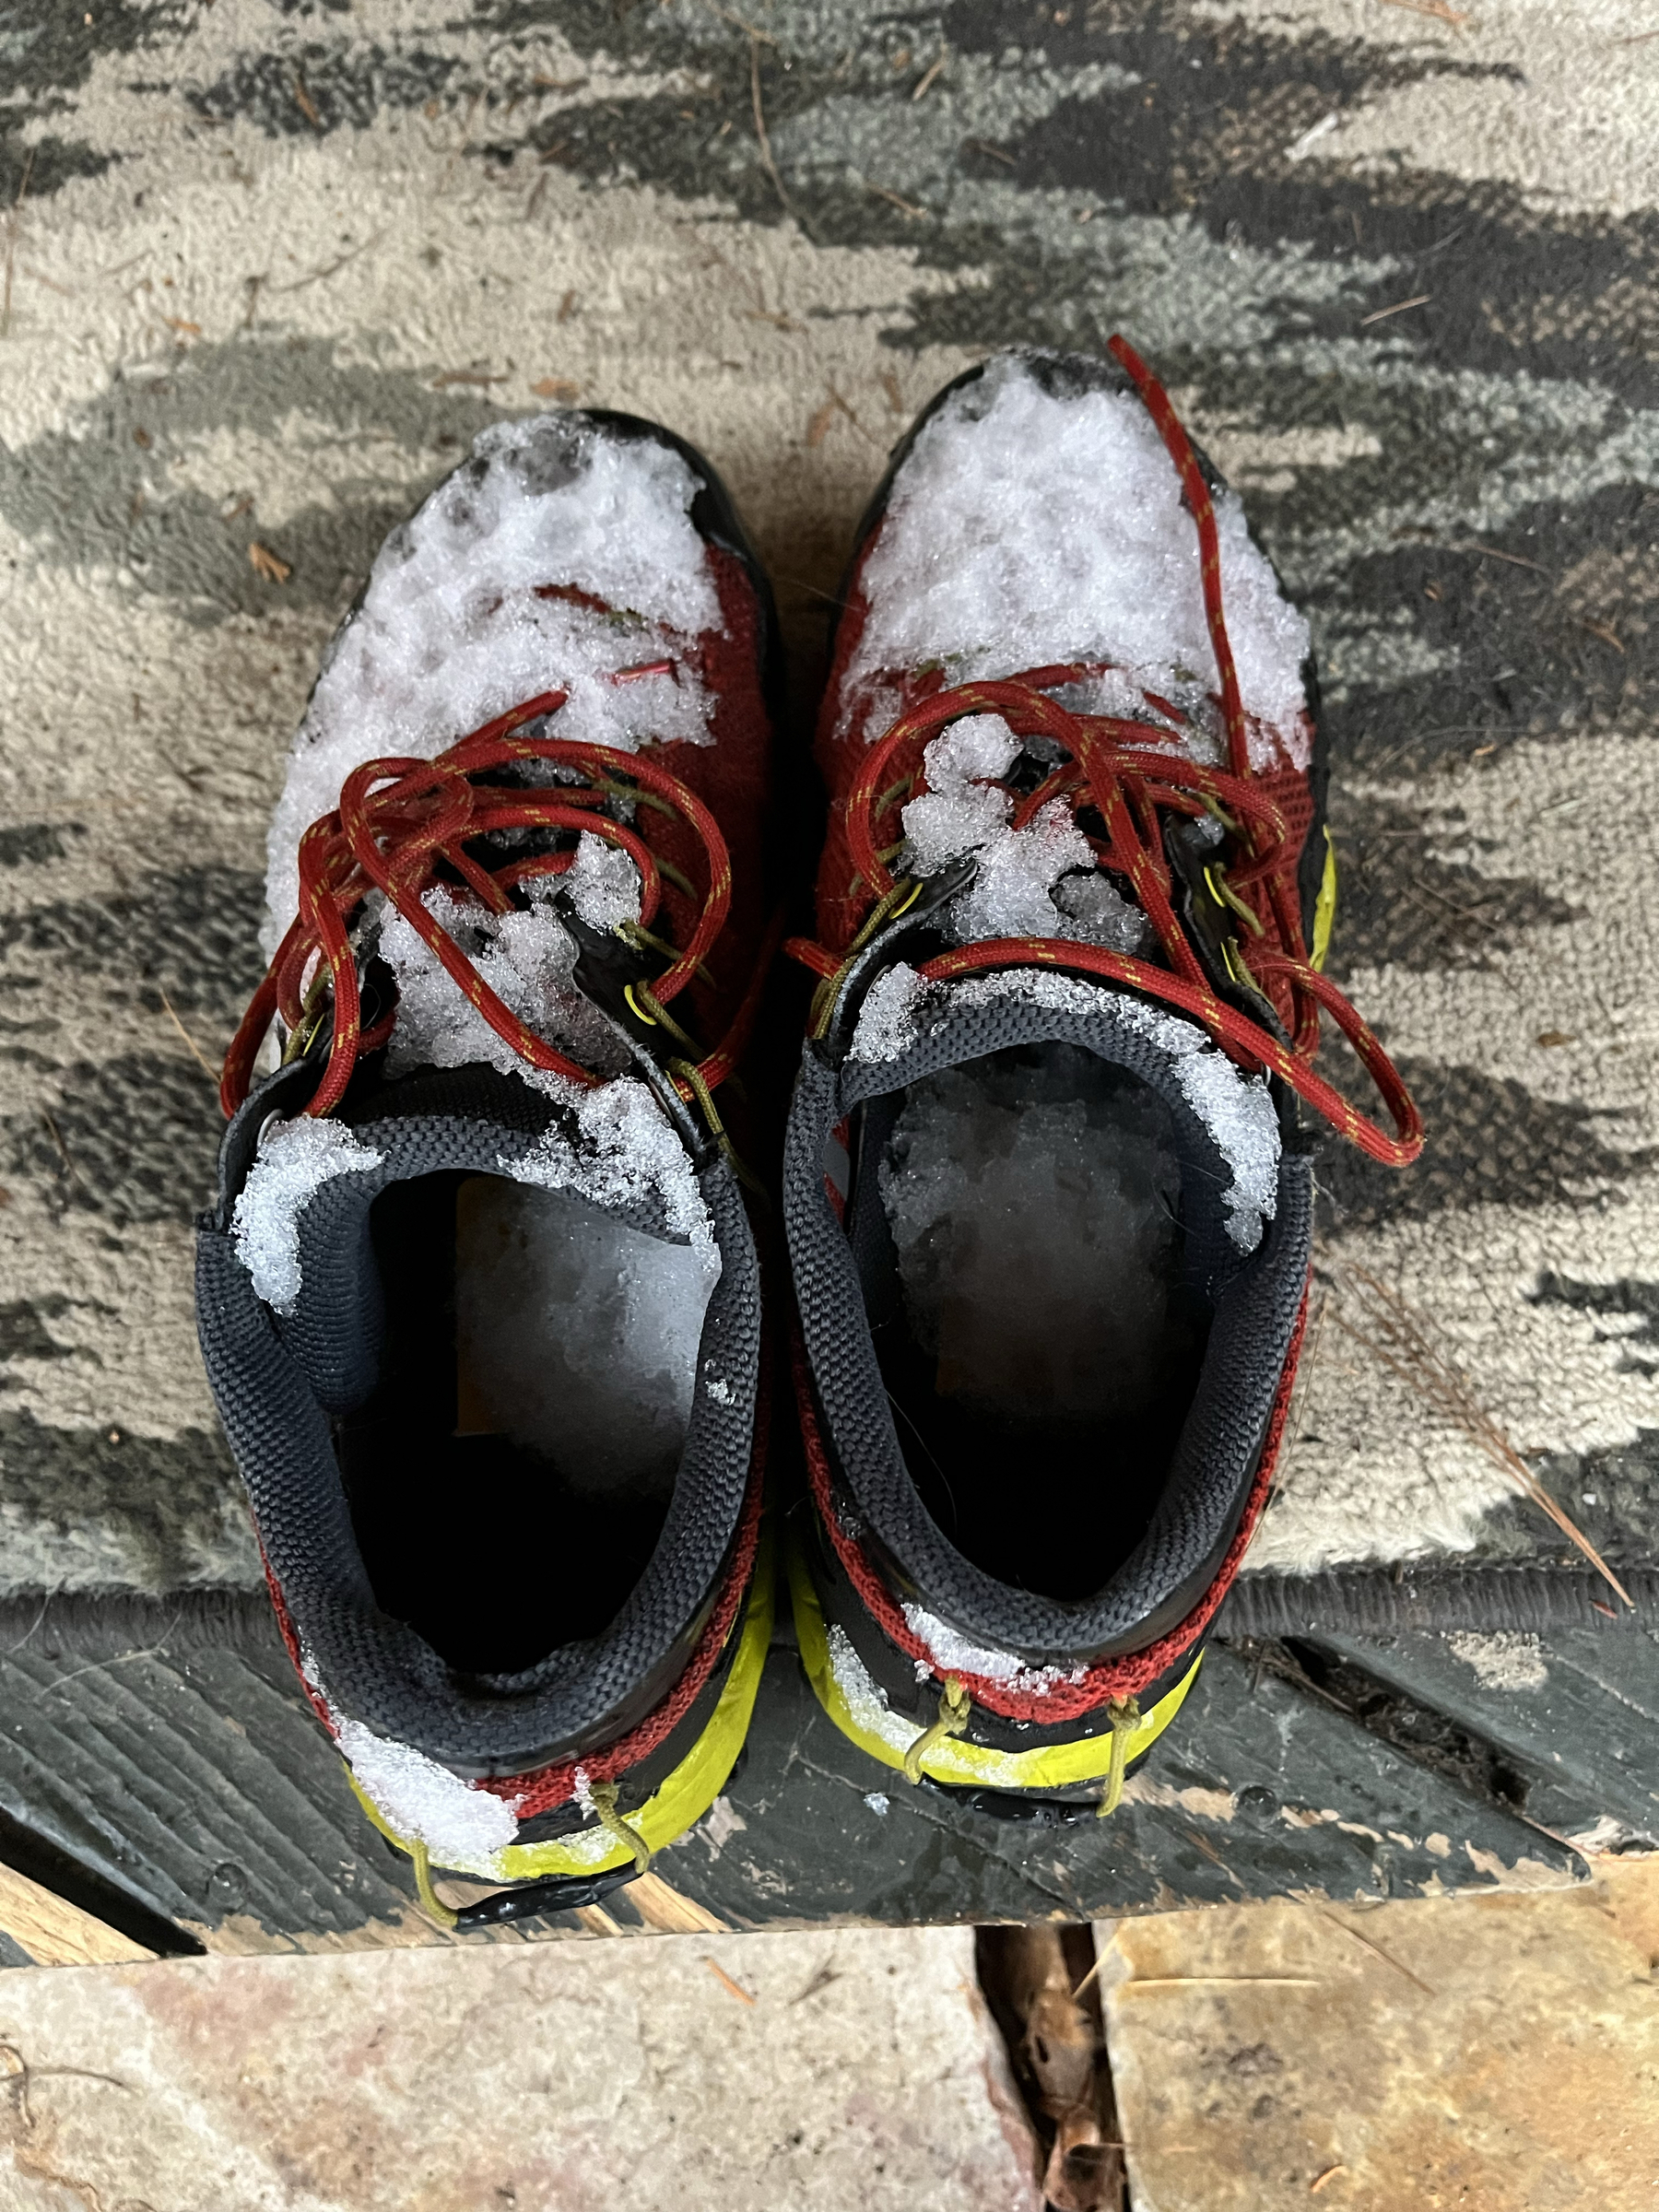 A pair of shoes soaked and covered in snow.